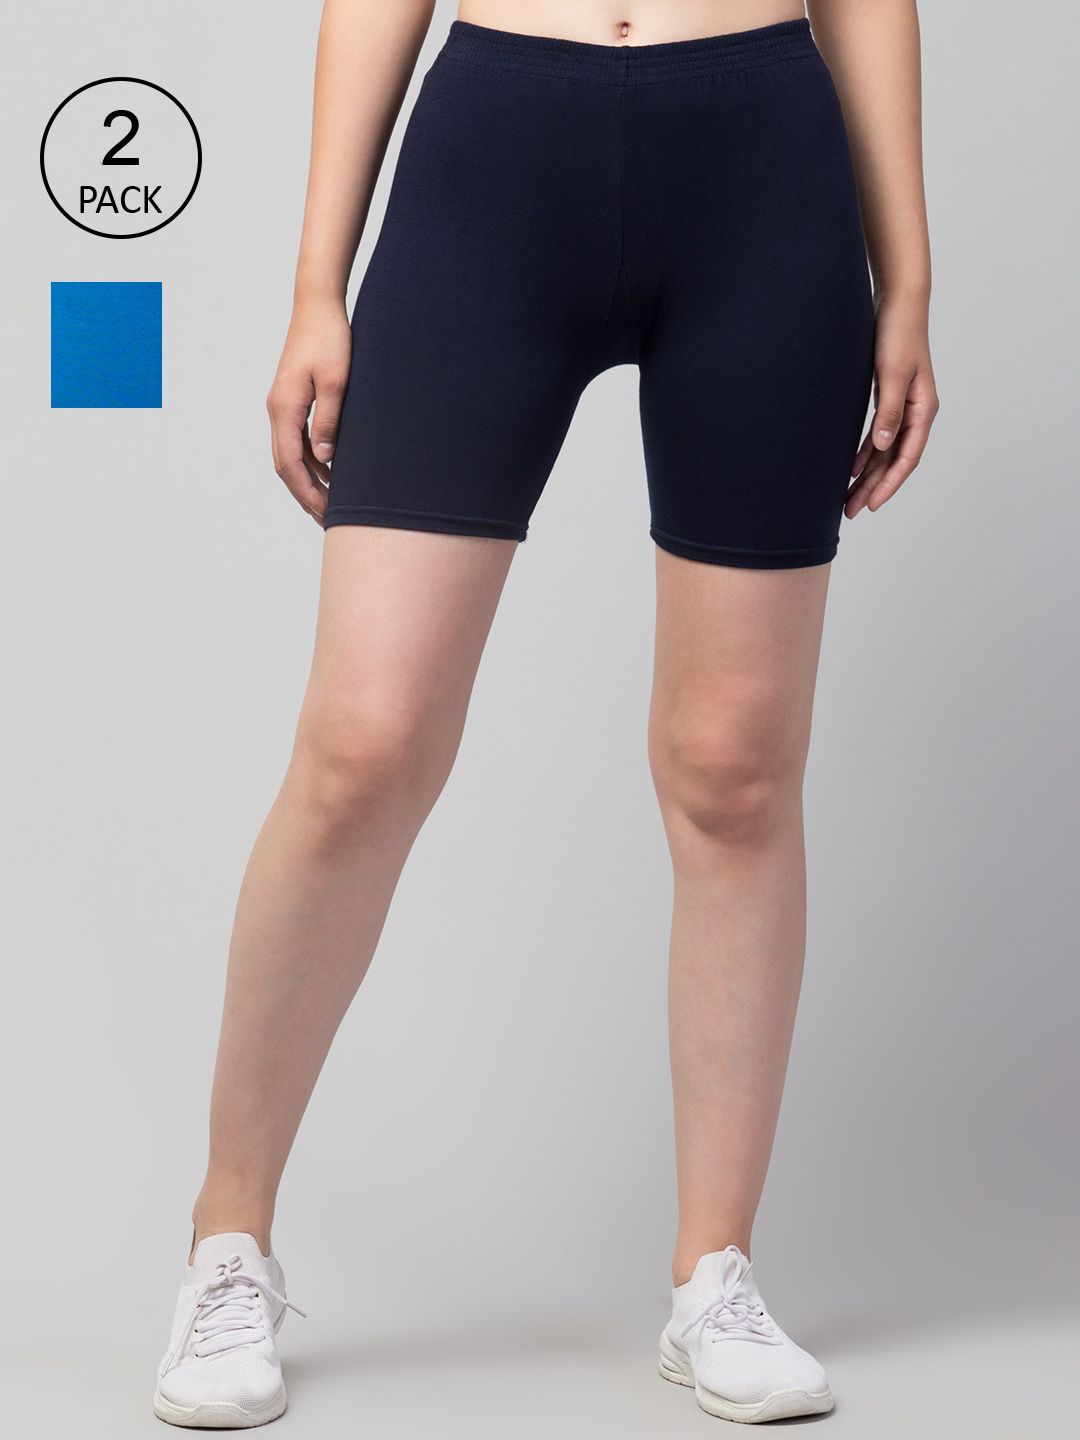 Apraa & Parma  Pack Of 2 Women Slim Fit Cycling Sports Shorts Price in India